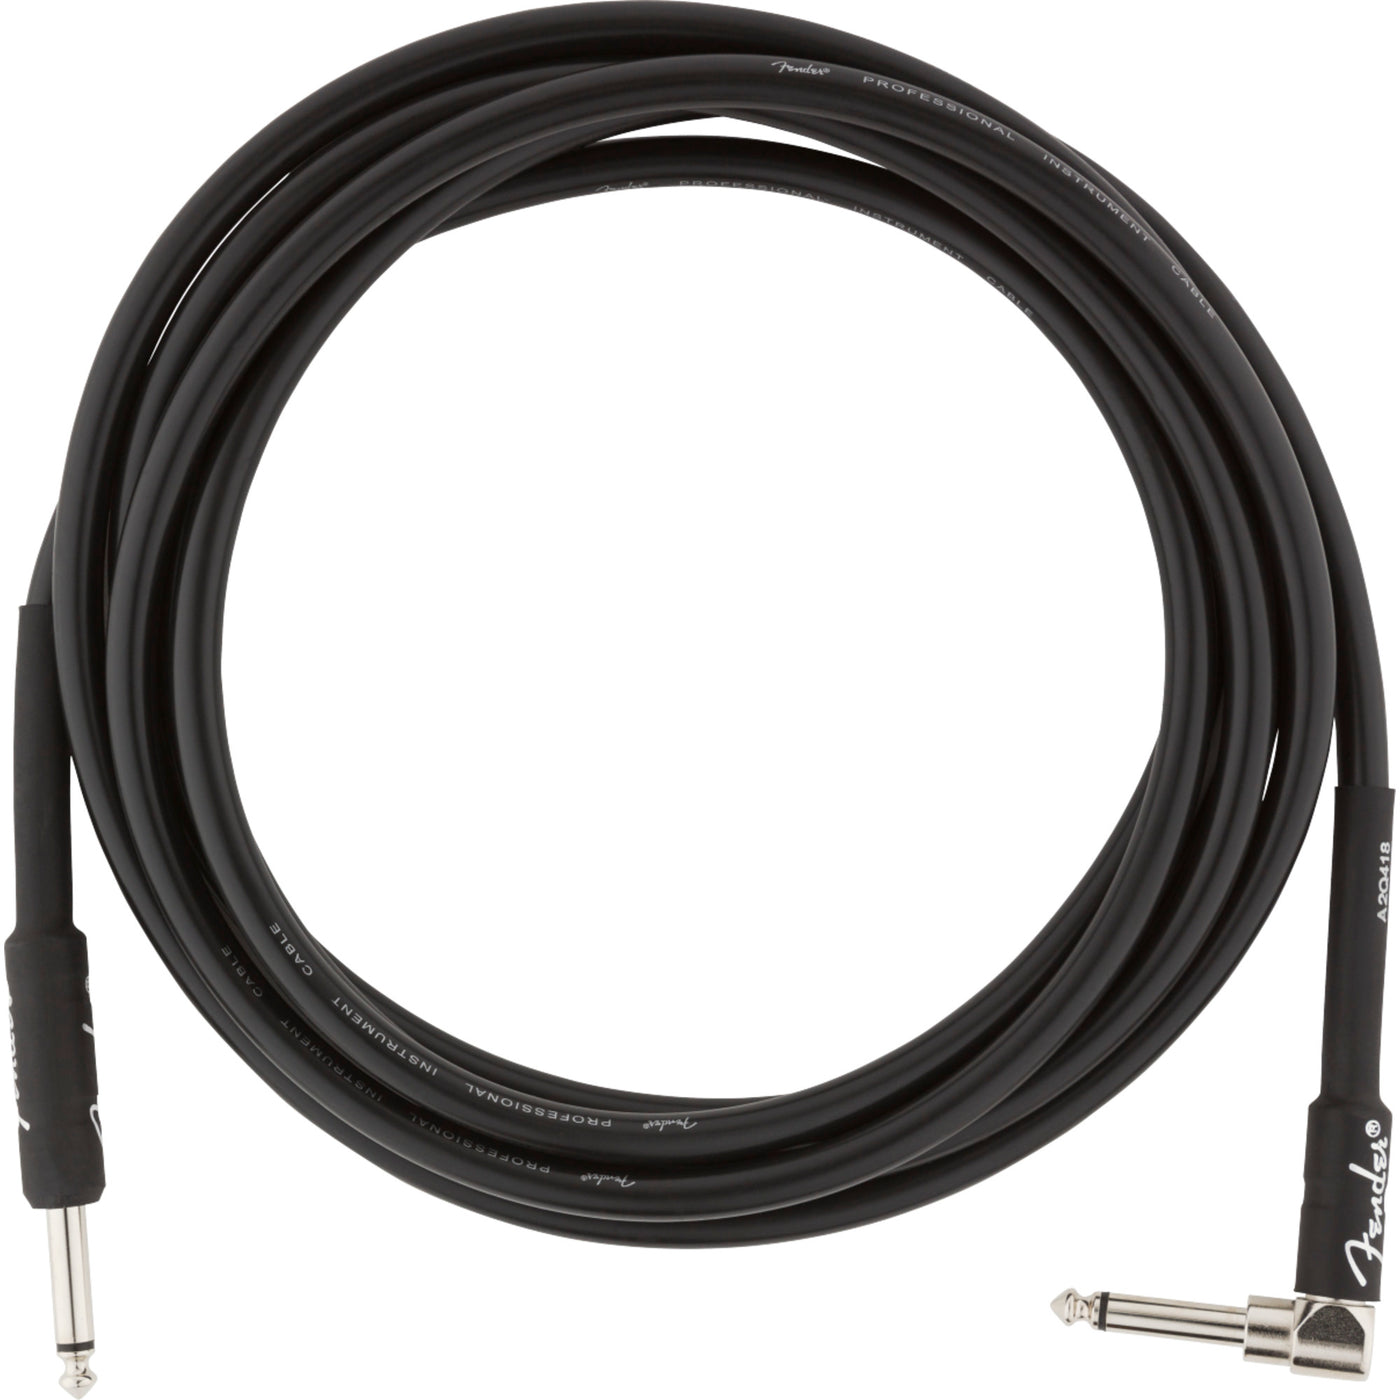 Fender Professional Series 10-Foot Straight to Angle Instrument Cable, Black (0990820025)